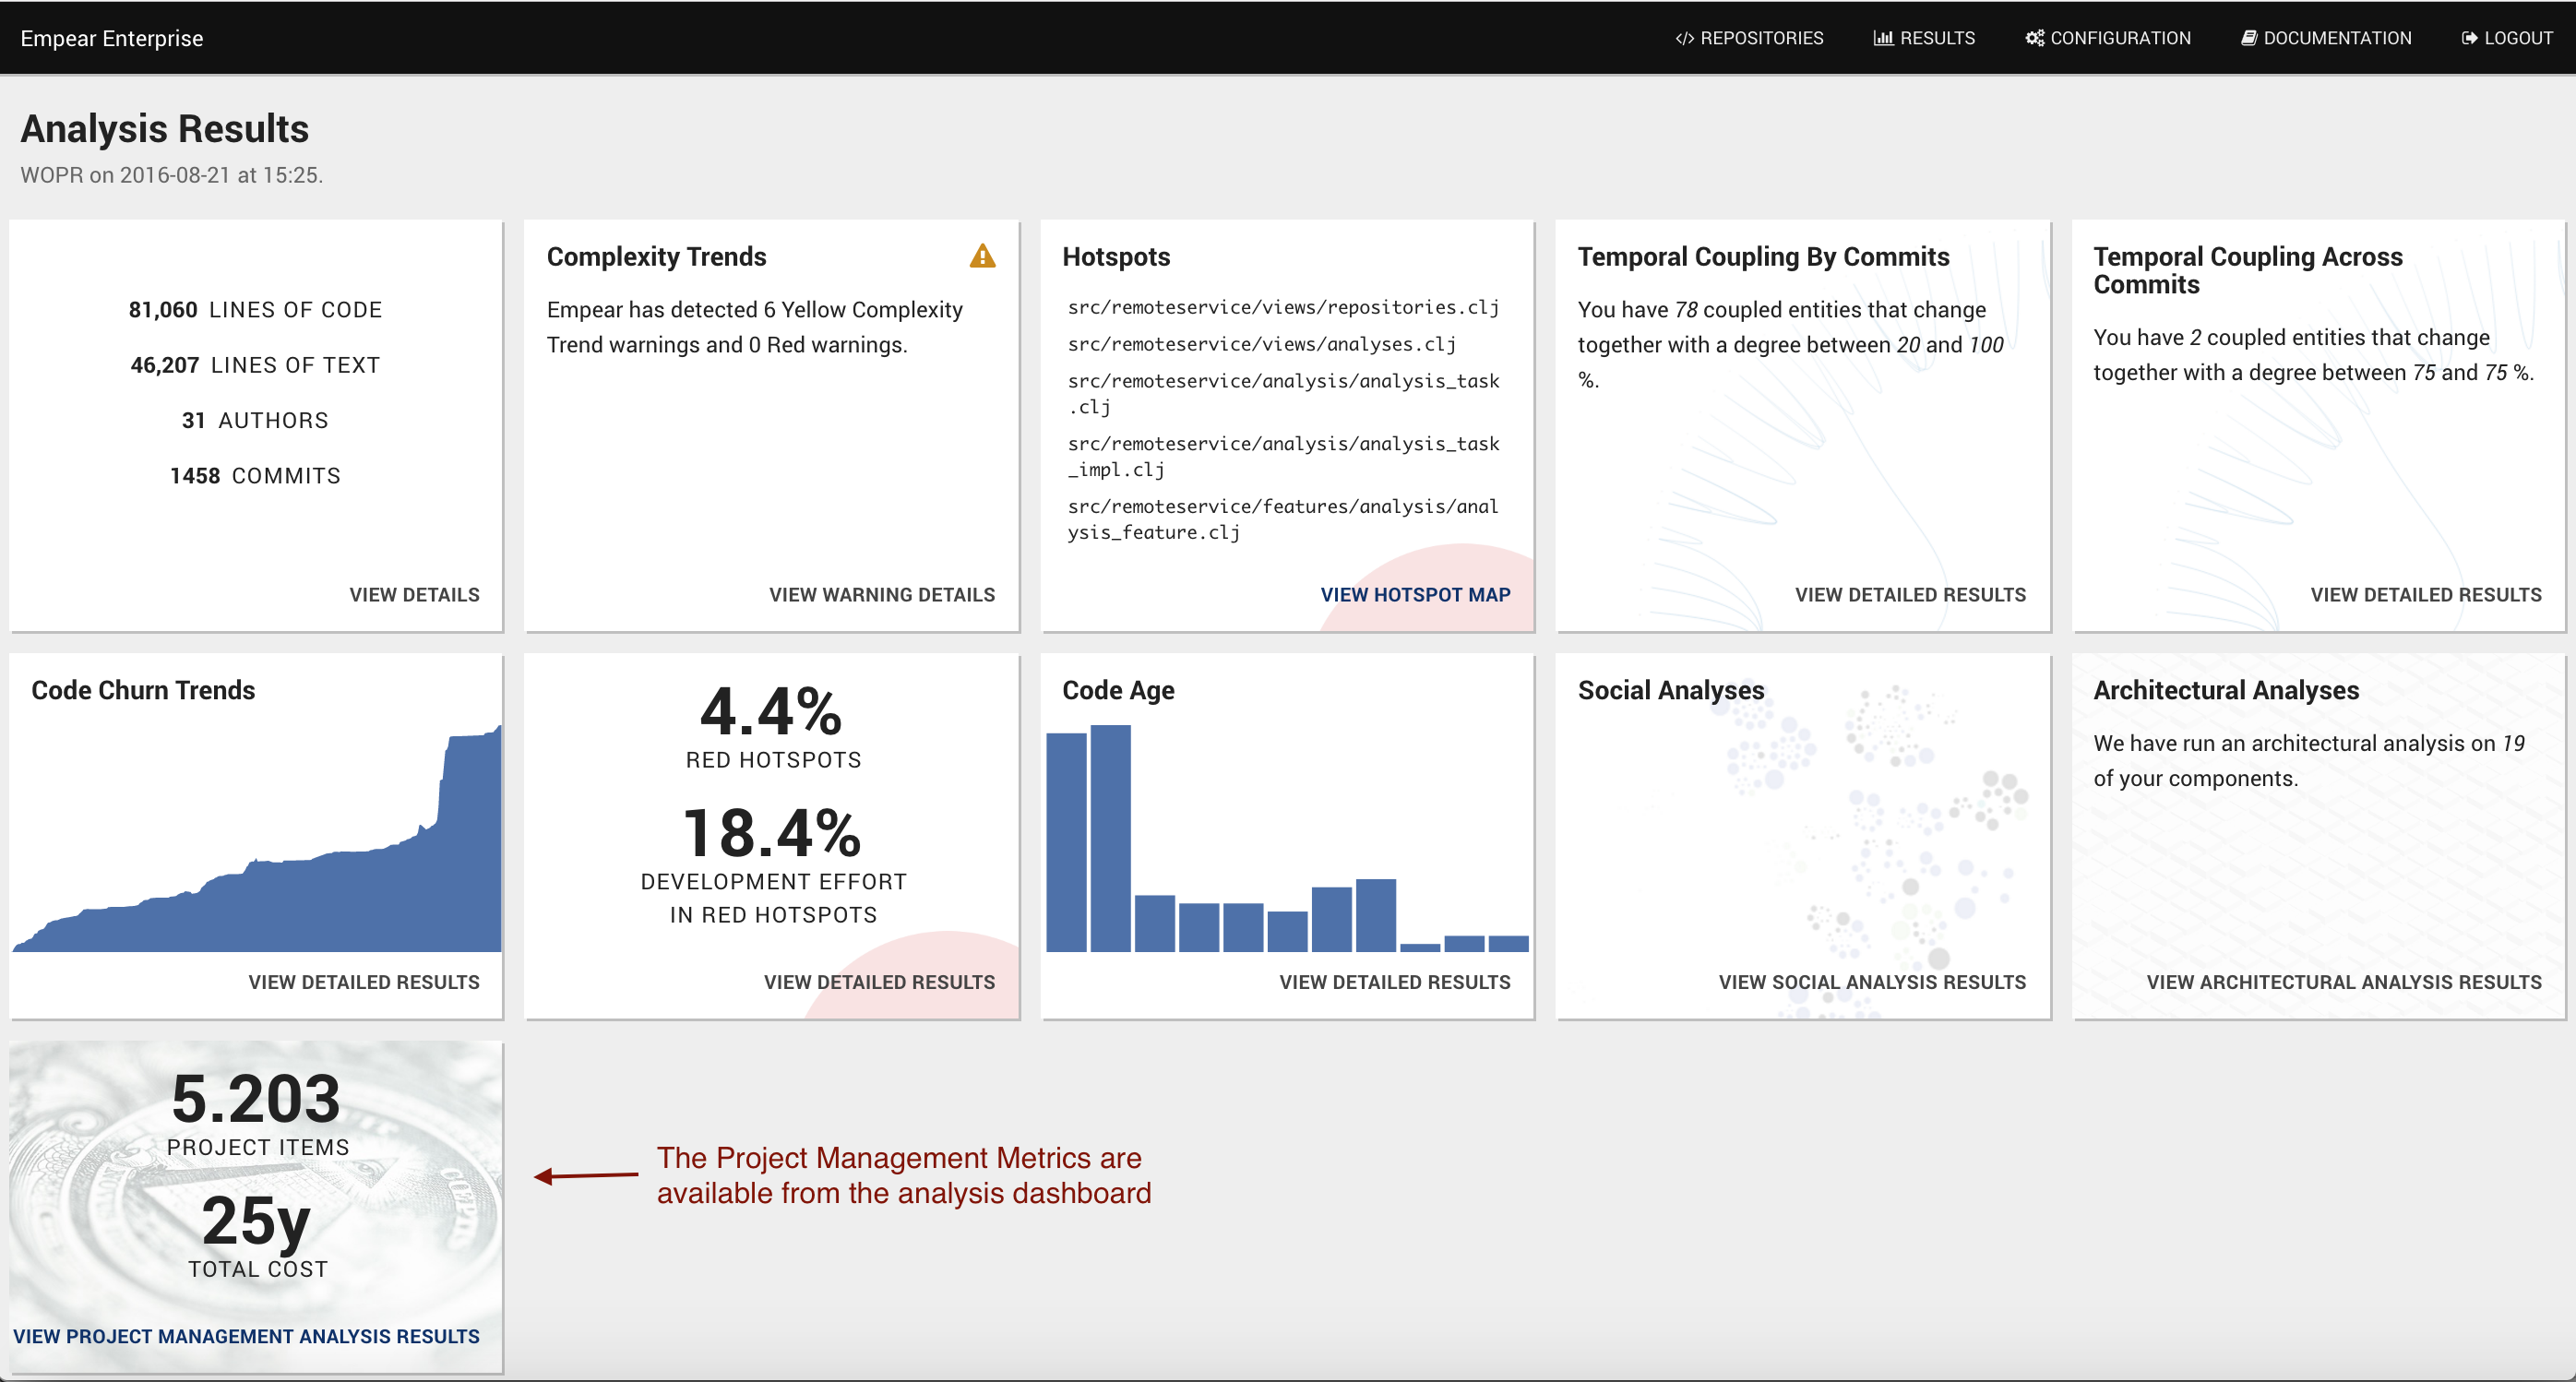 The metrics are accessed from the analysis dashboard